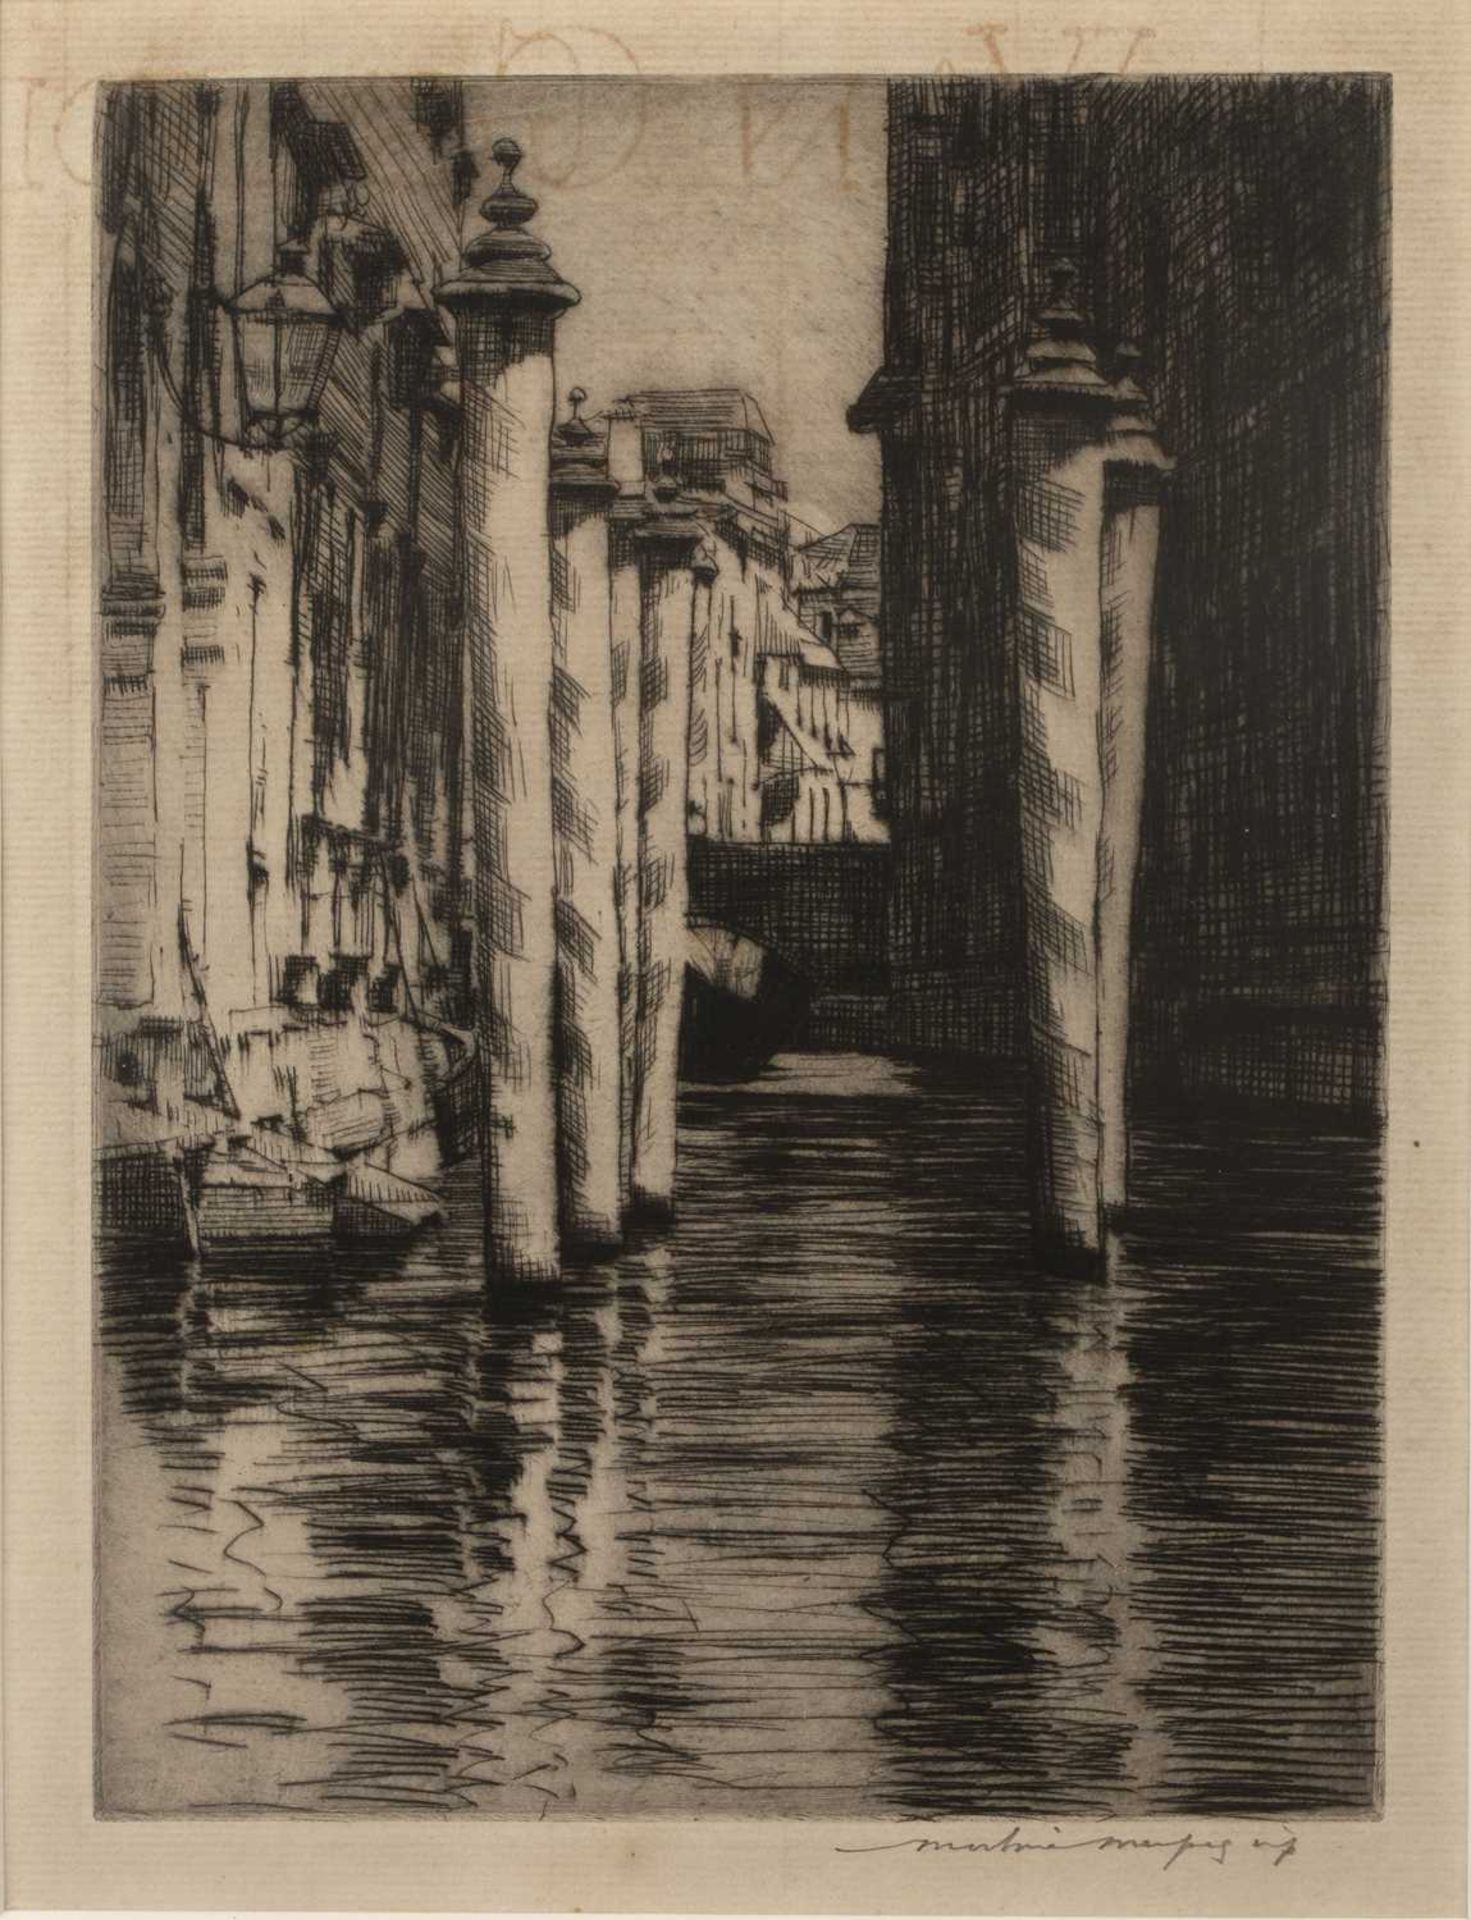 Mortimer Menpes (1855-1938) A Narrow Canal, Venice, circa 1912 signed in pencil (in the margin)